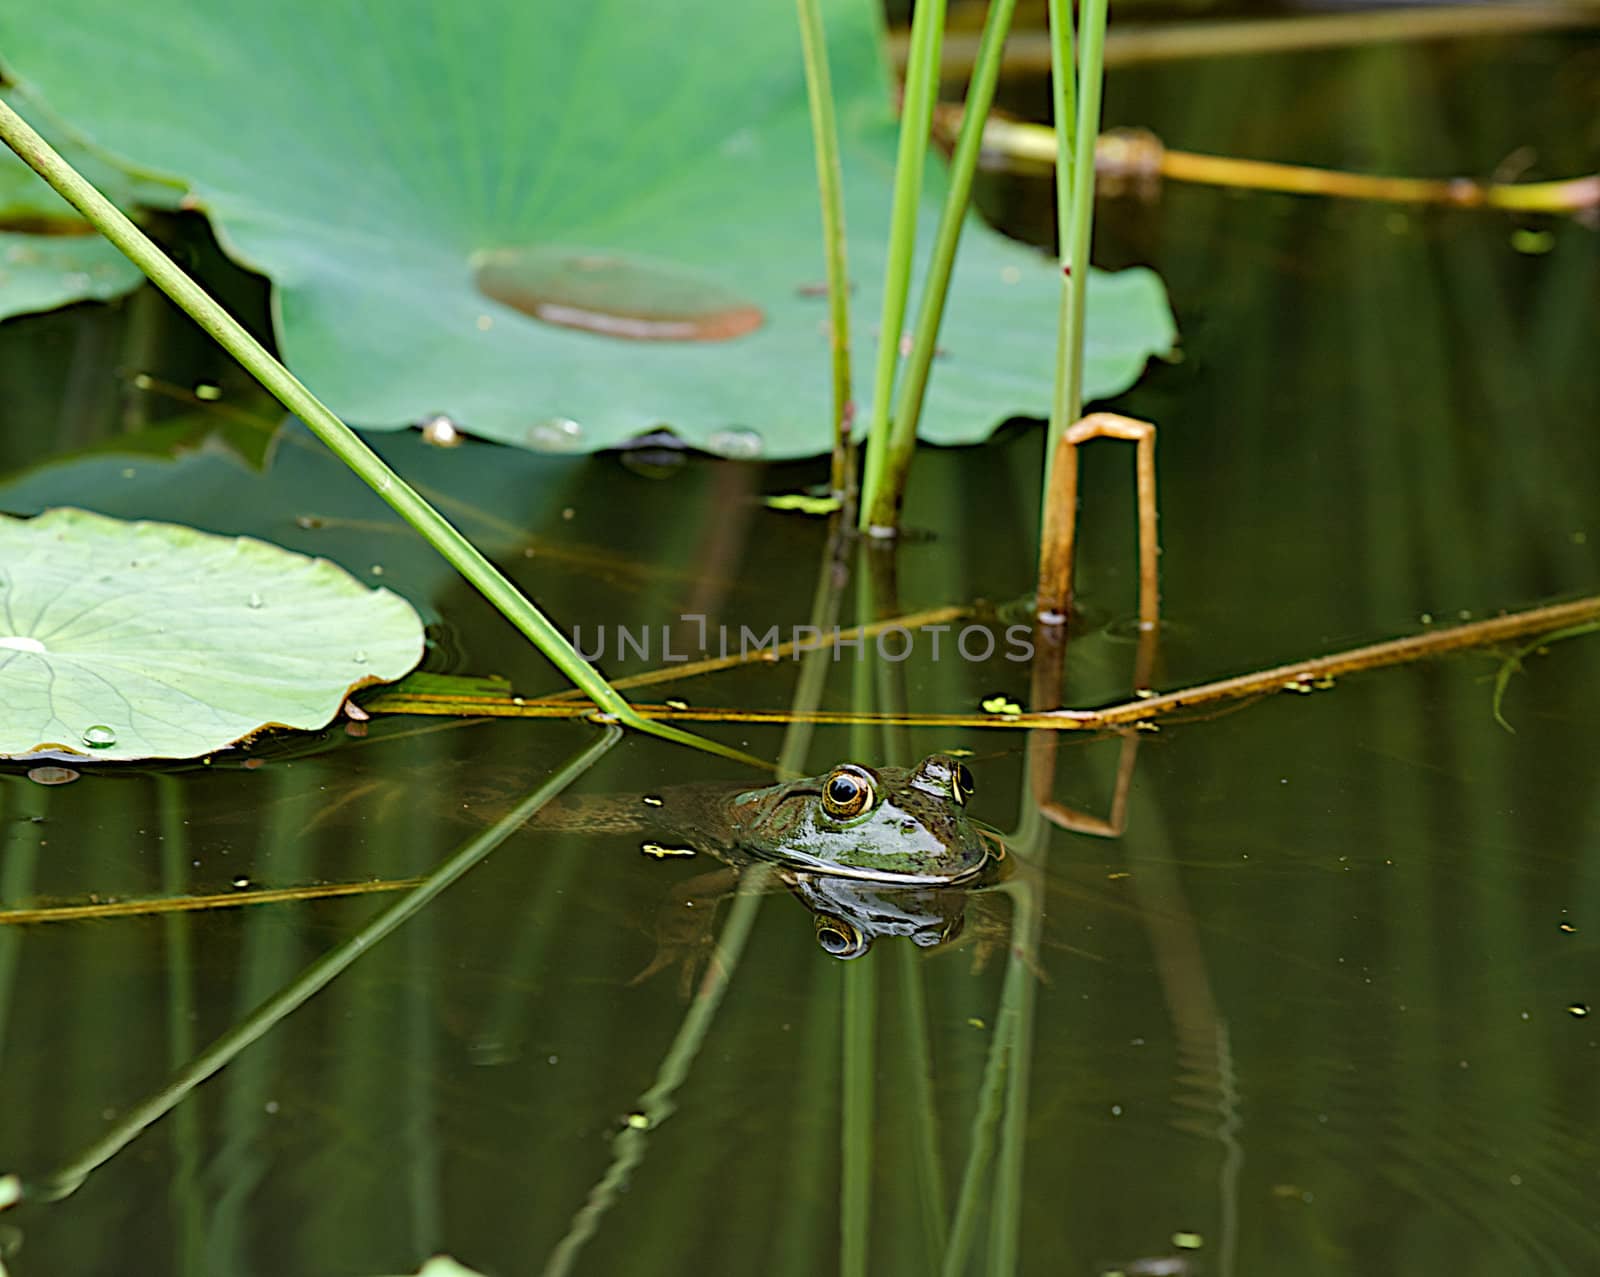 Frog in natural aquatic habitat peeking above the surface of the water.  Reflection of eyes in water.